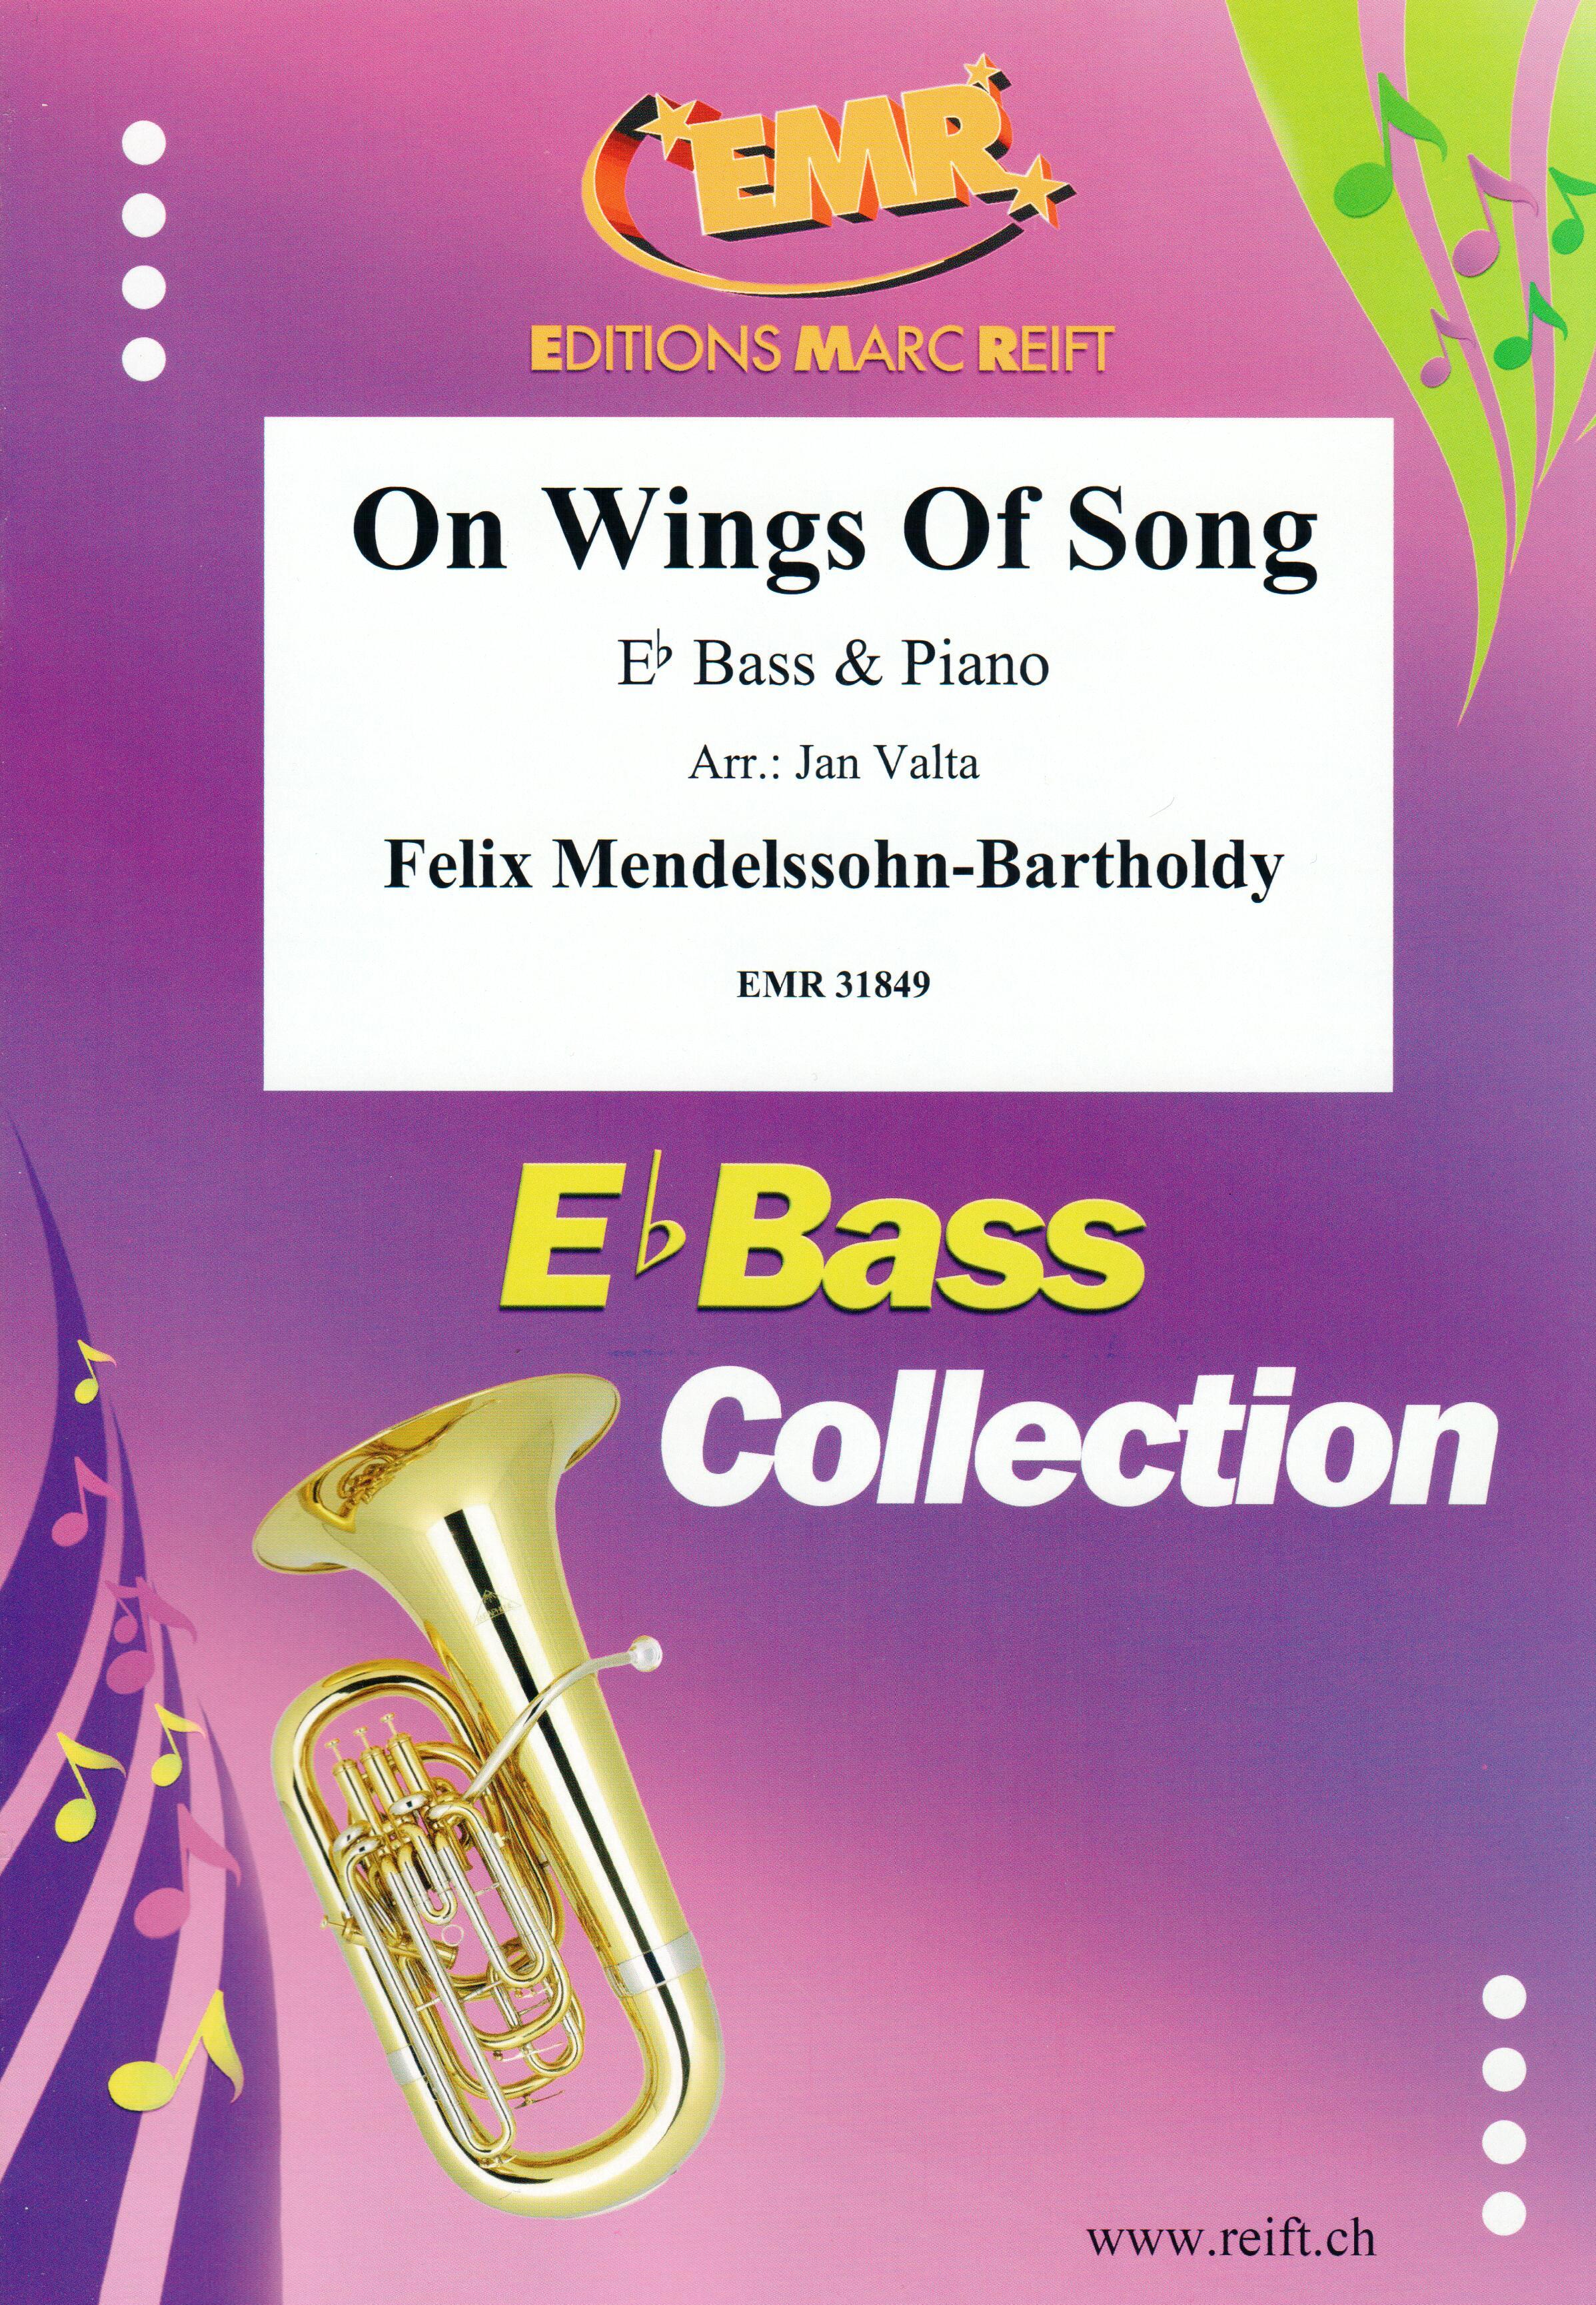 ON WINGS OF SONG, SOLOS - E♭. Bass